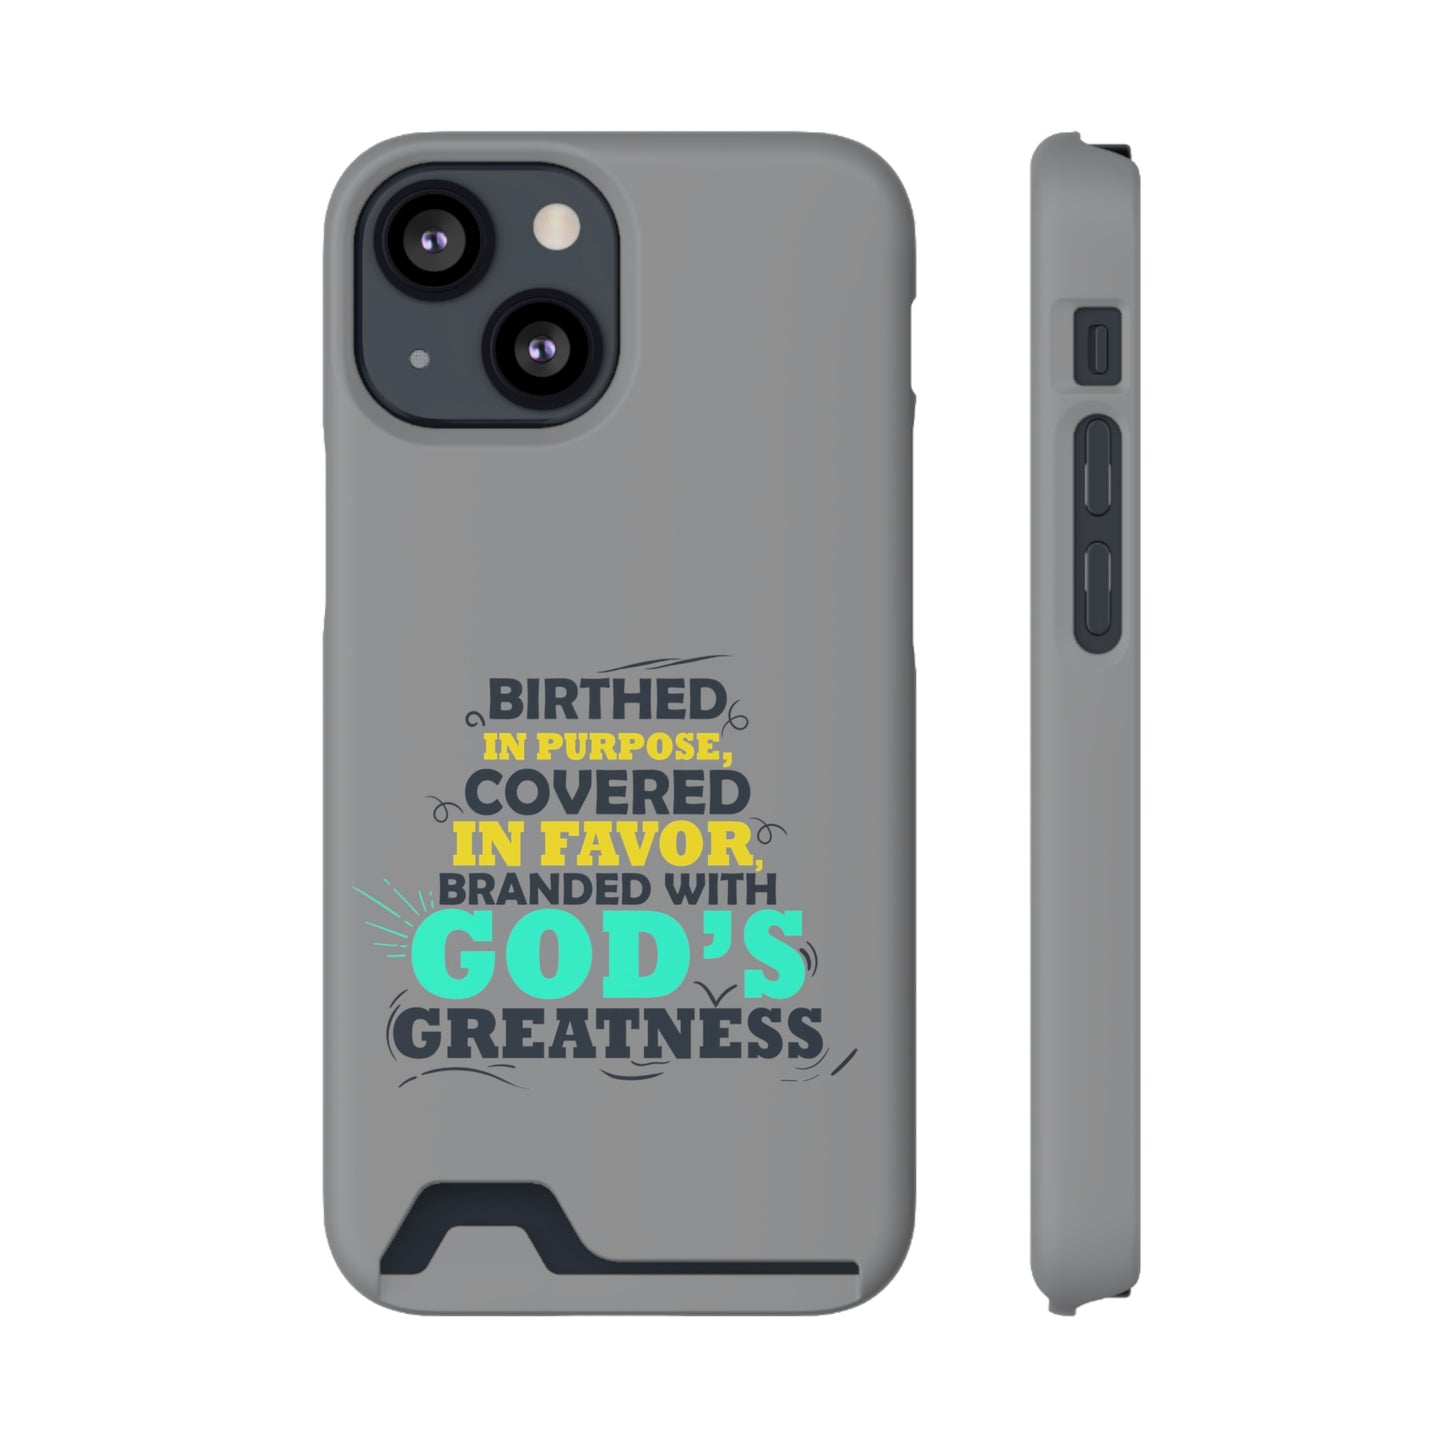 Birthed In Purpose, Covered in Favor, Branded With God's Greatness Phone Case With Card Holder